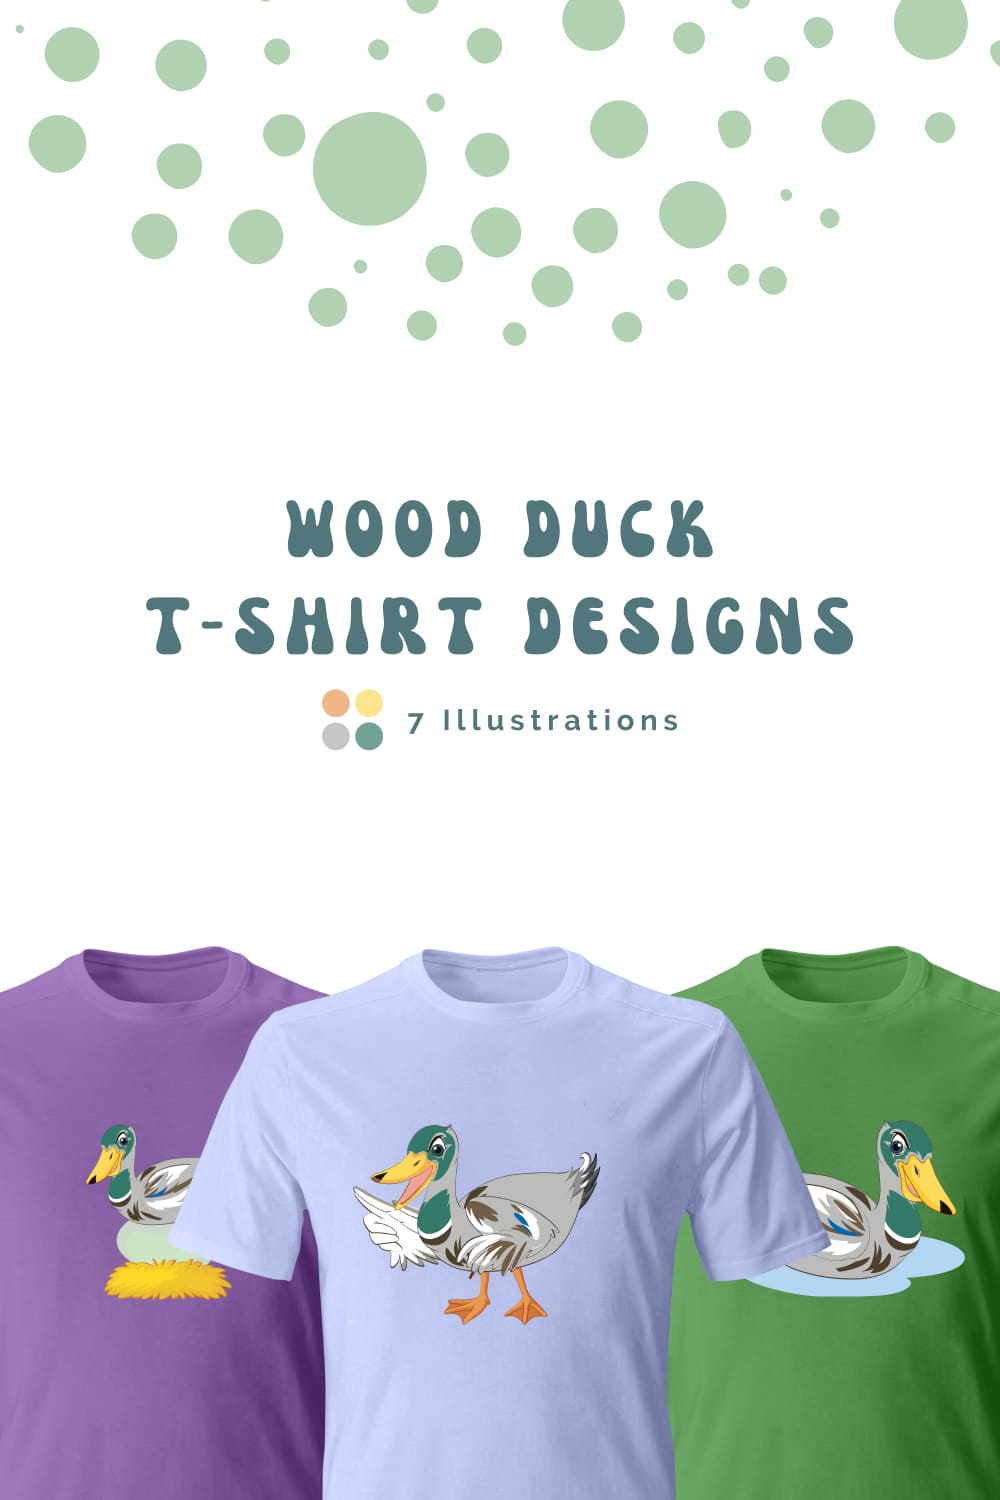 Selection of images of t-shirts with cartoon wood duck prints.